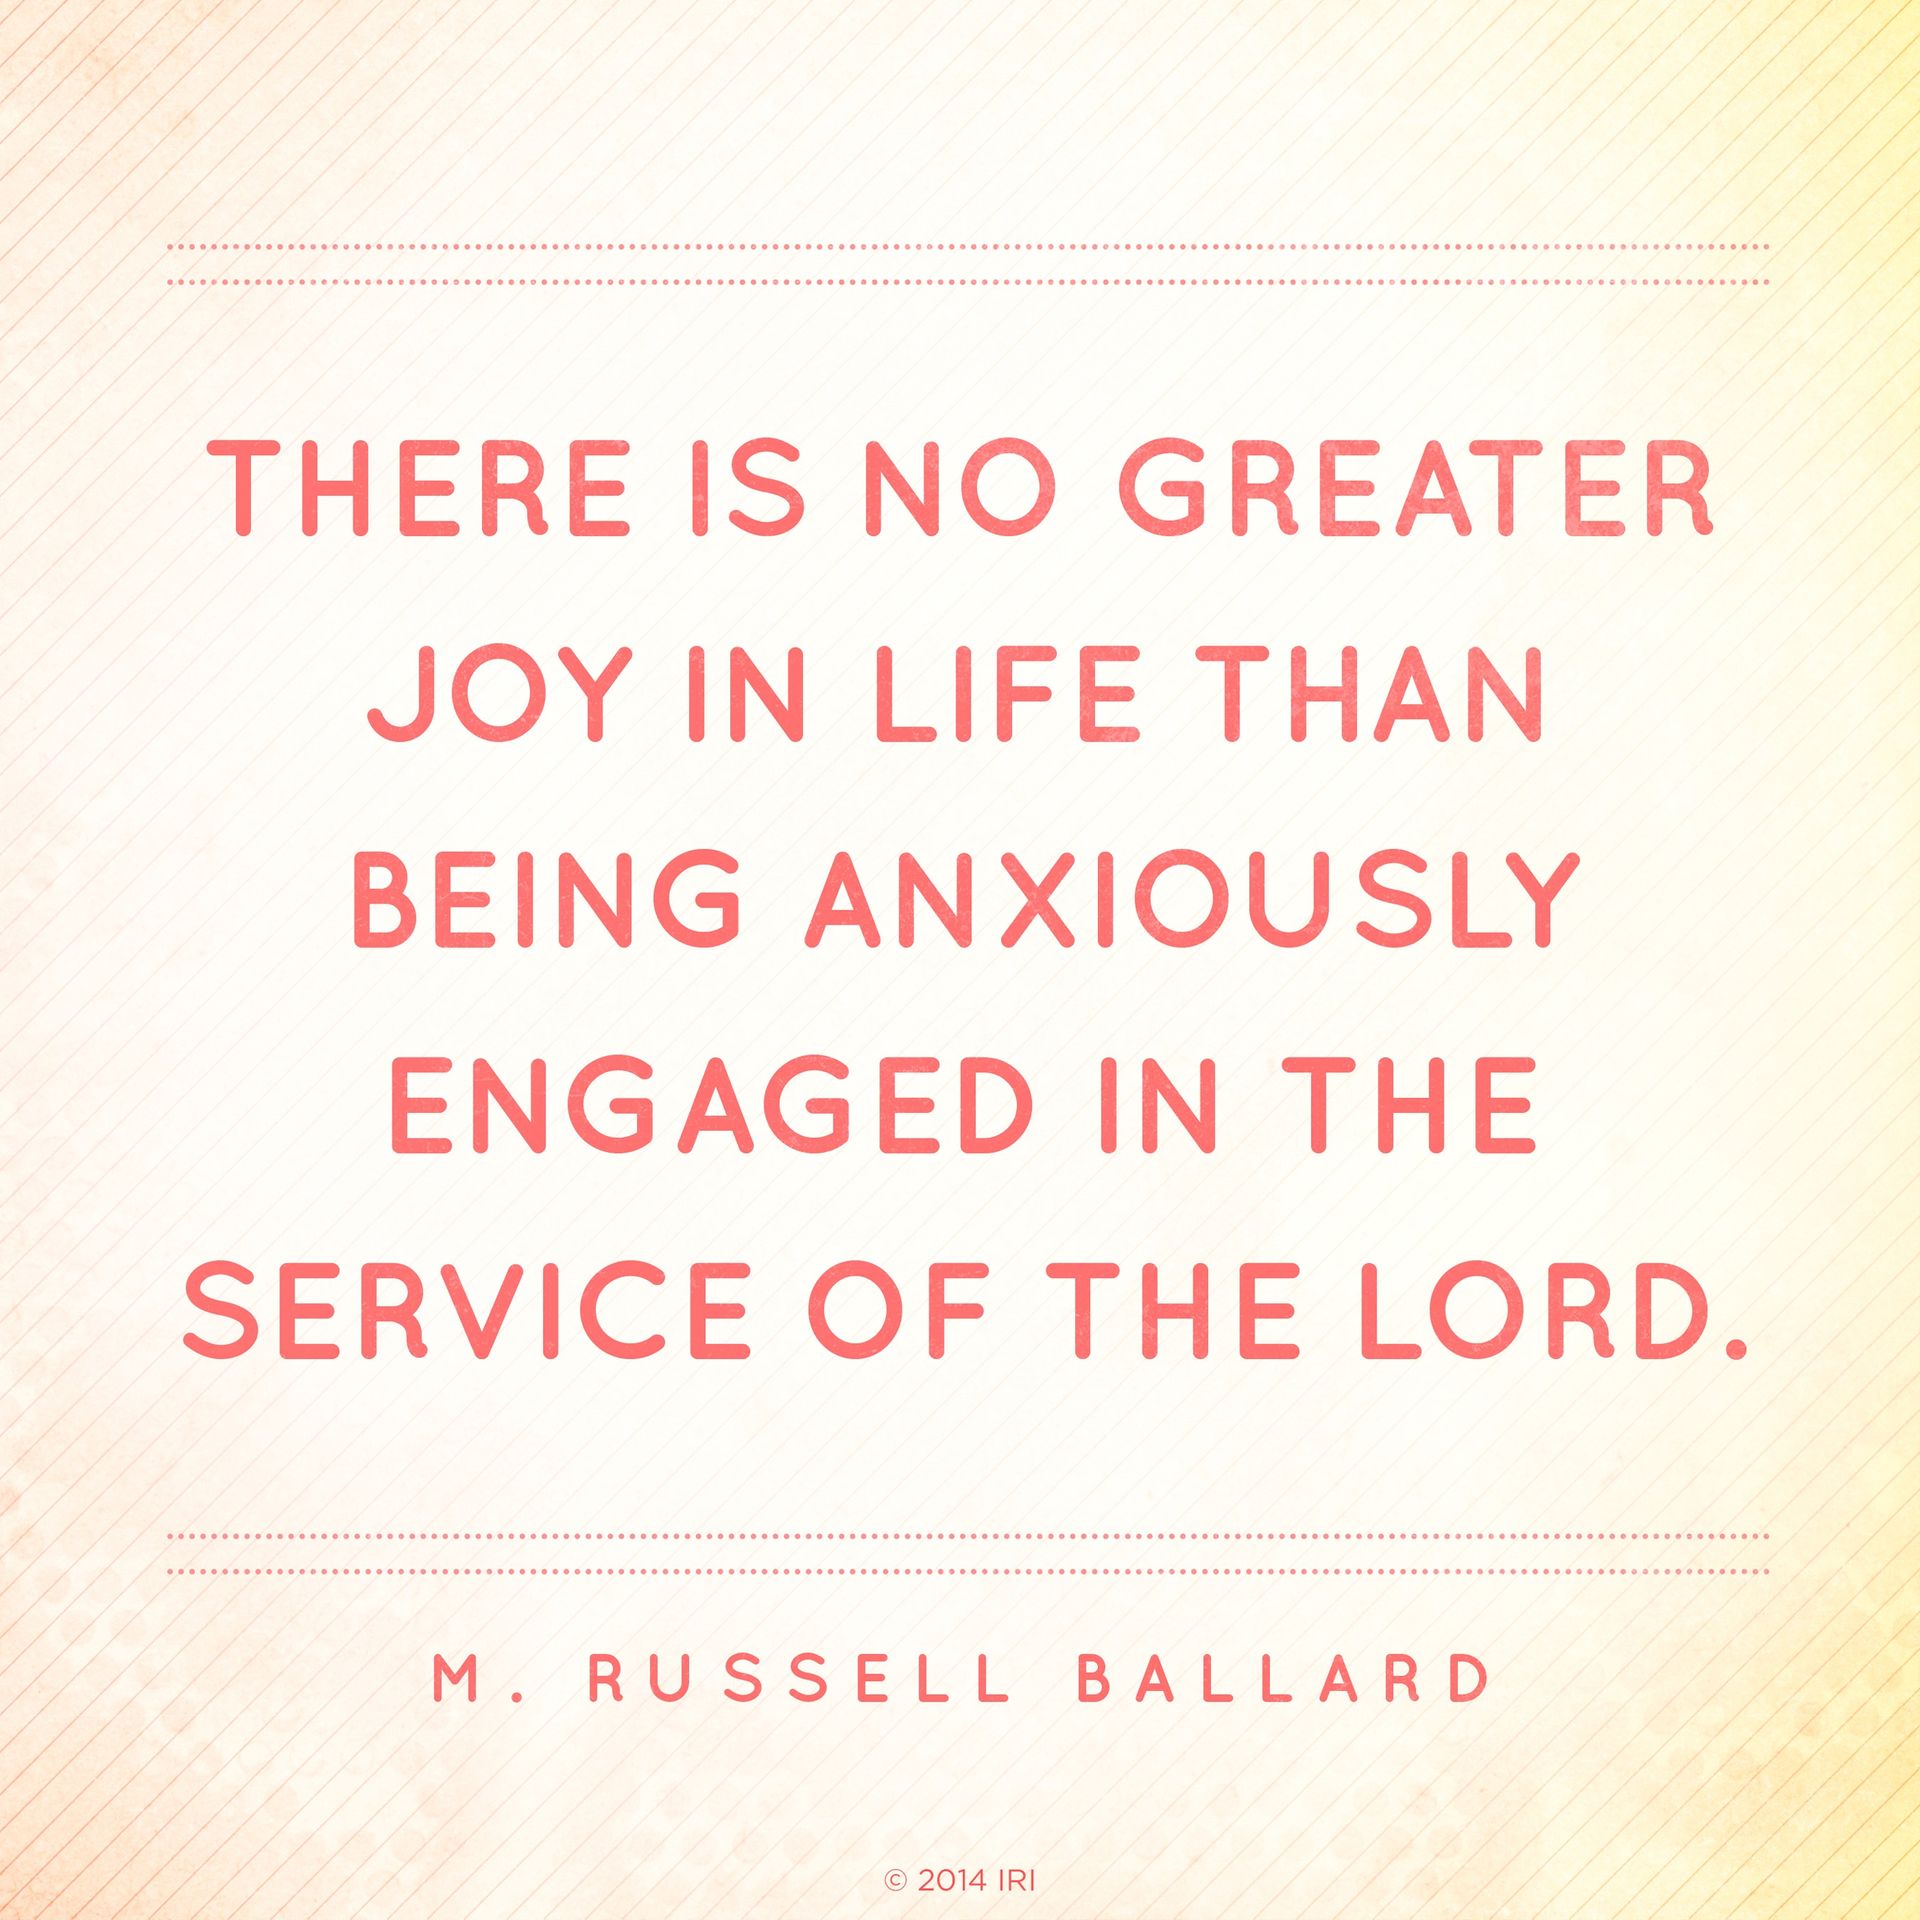 “There is no greater joy in life than being anxiously engaged in the service of the Lord.”—Elder M. Russell Ballard, “Put Your Trust in the Lord”